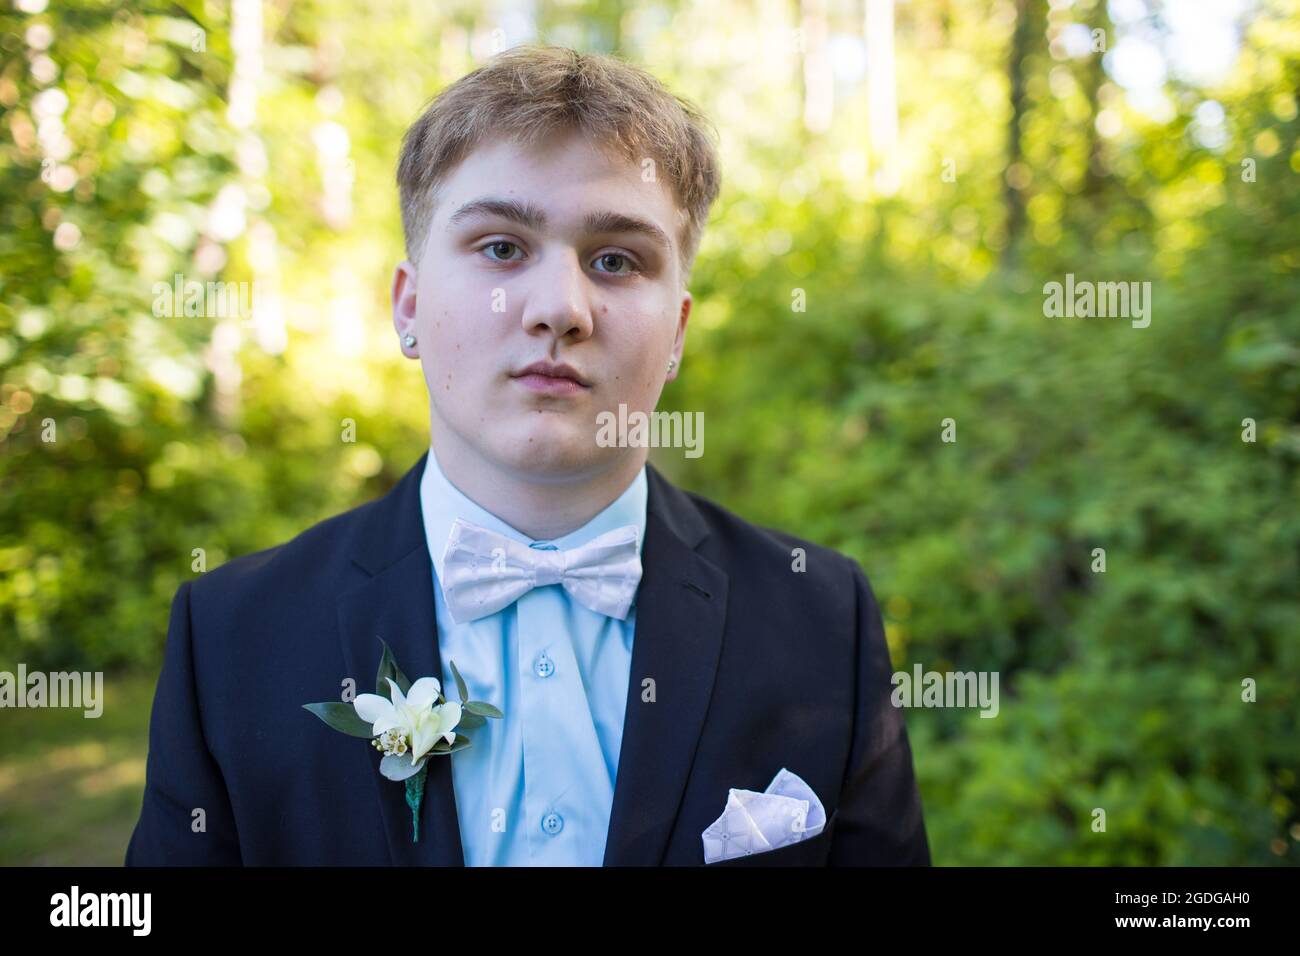 Portrait of young man with expressionless, mundane face Stock Photo